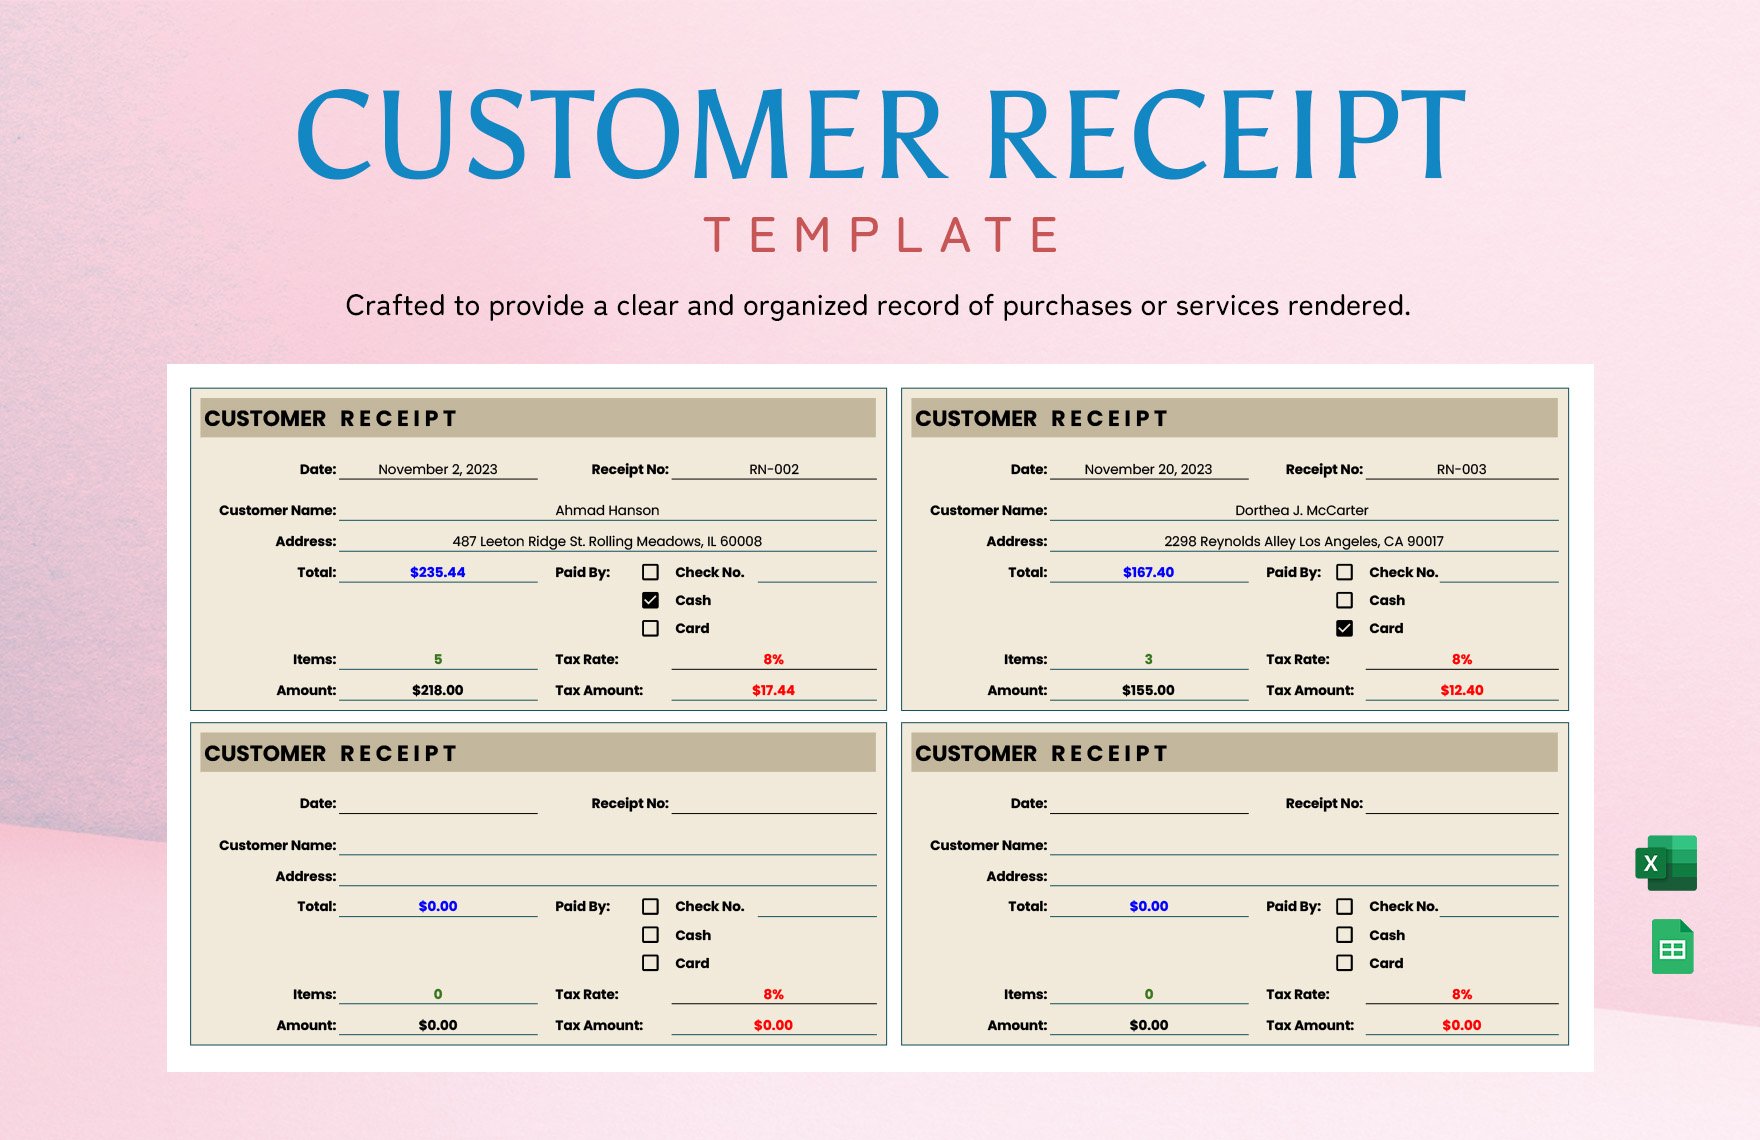 Customer Receipt Template in Excel, Google Sheets